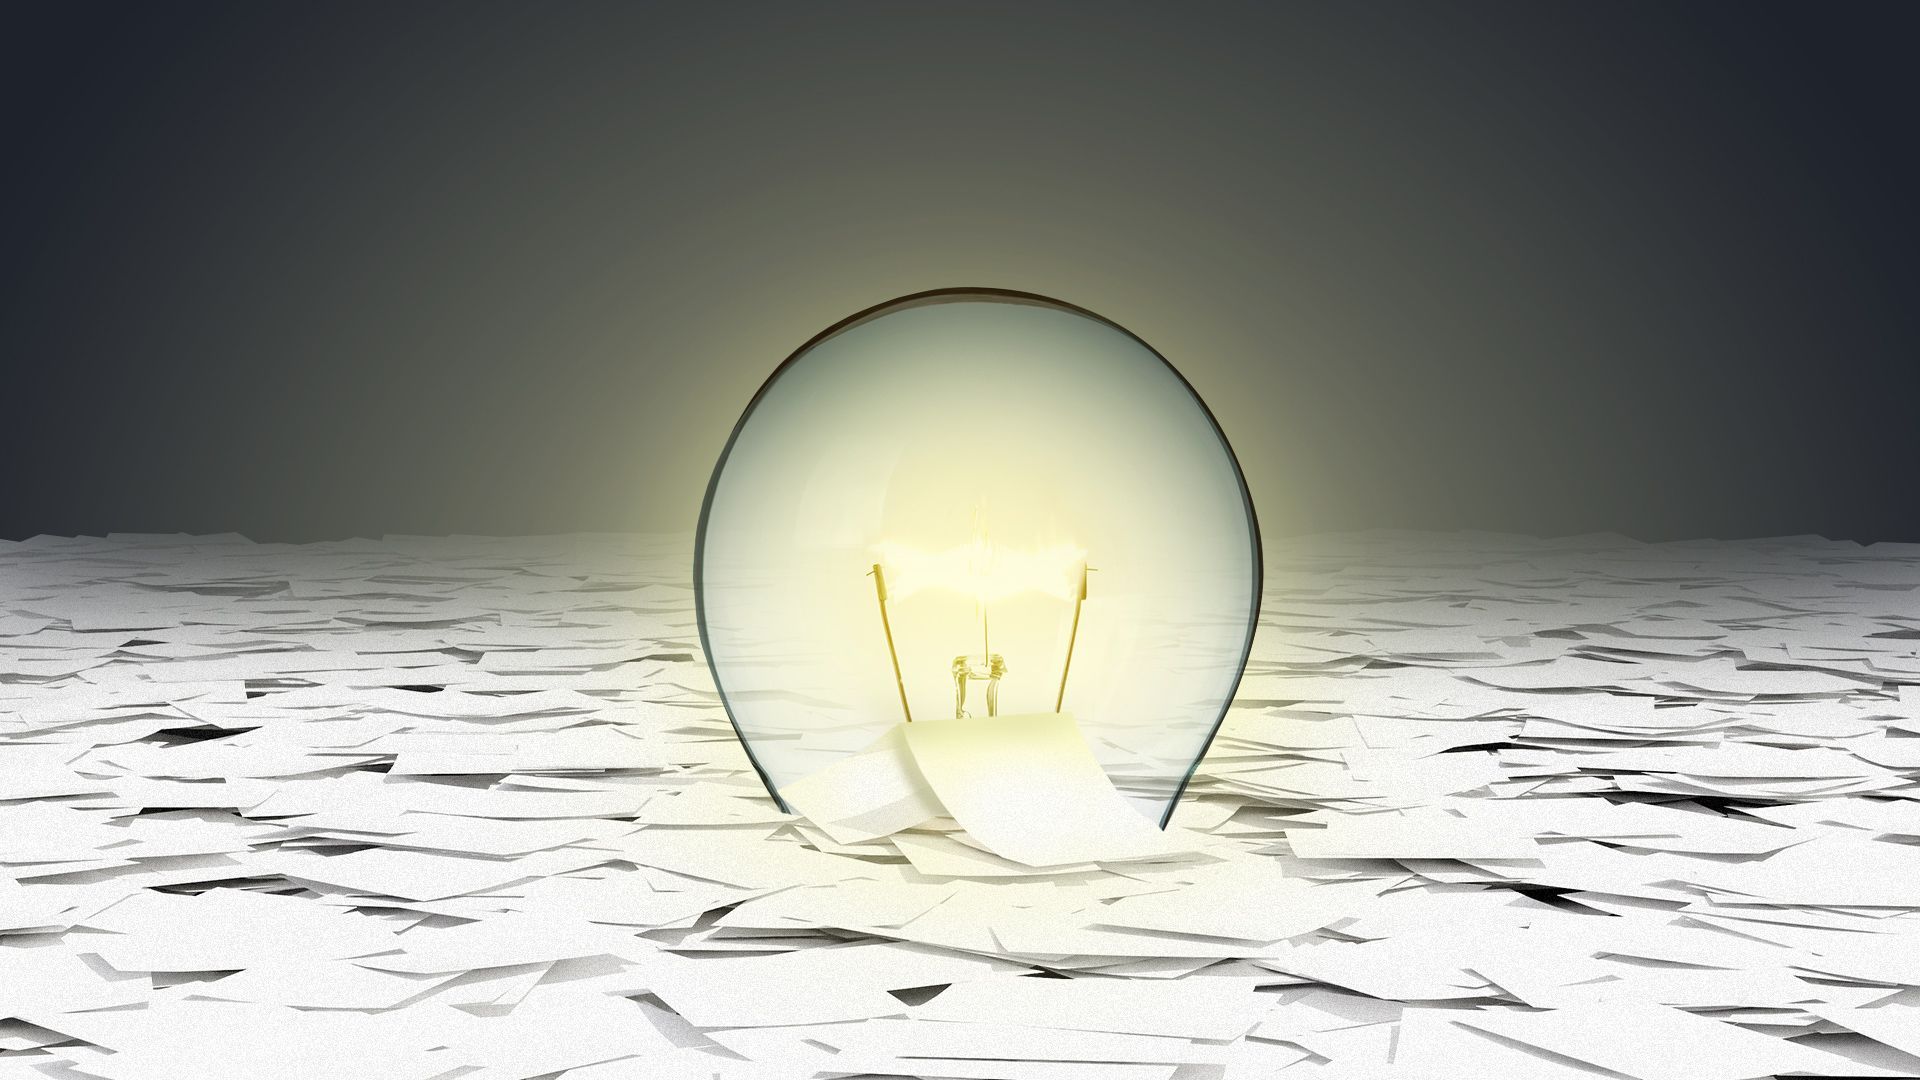 Illustration of a lightbulb being buried in a sea of paper.  